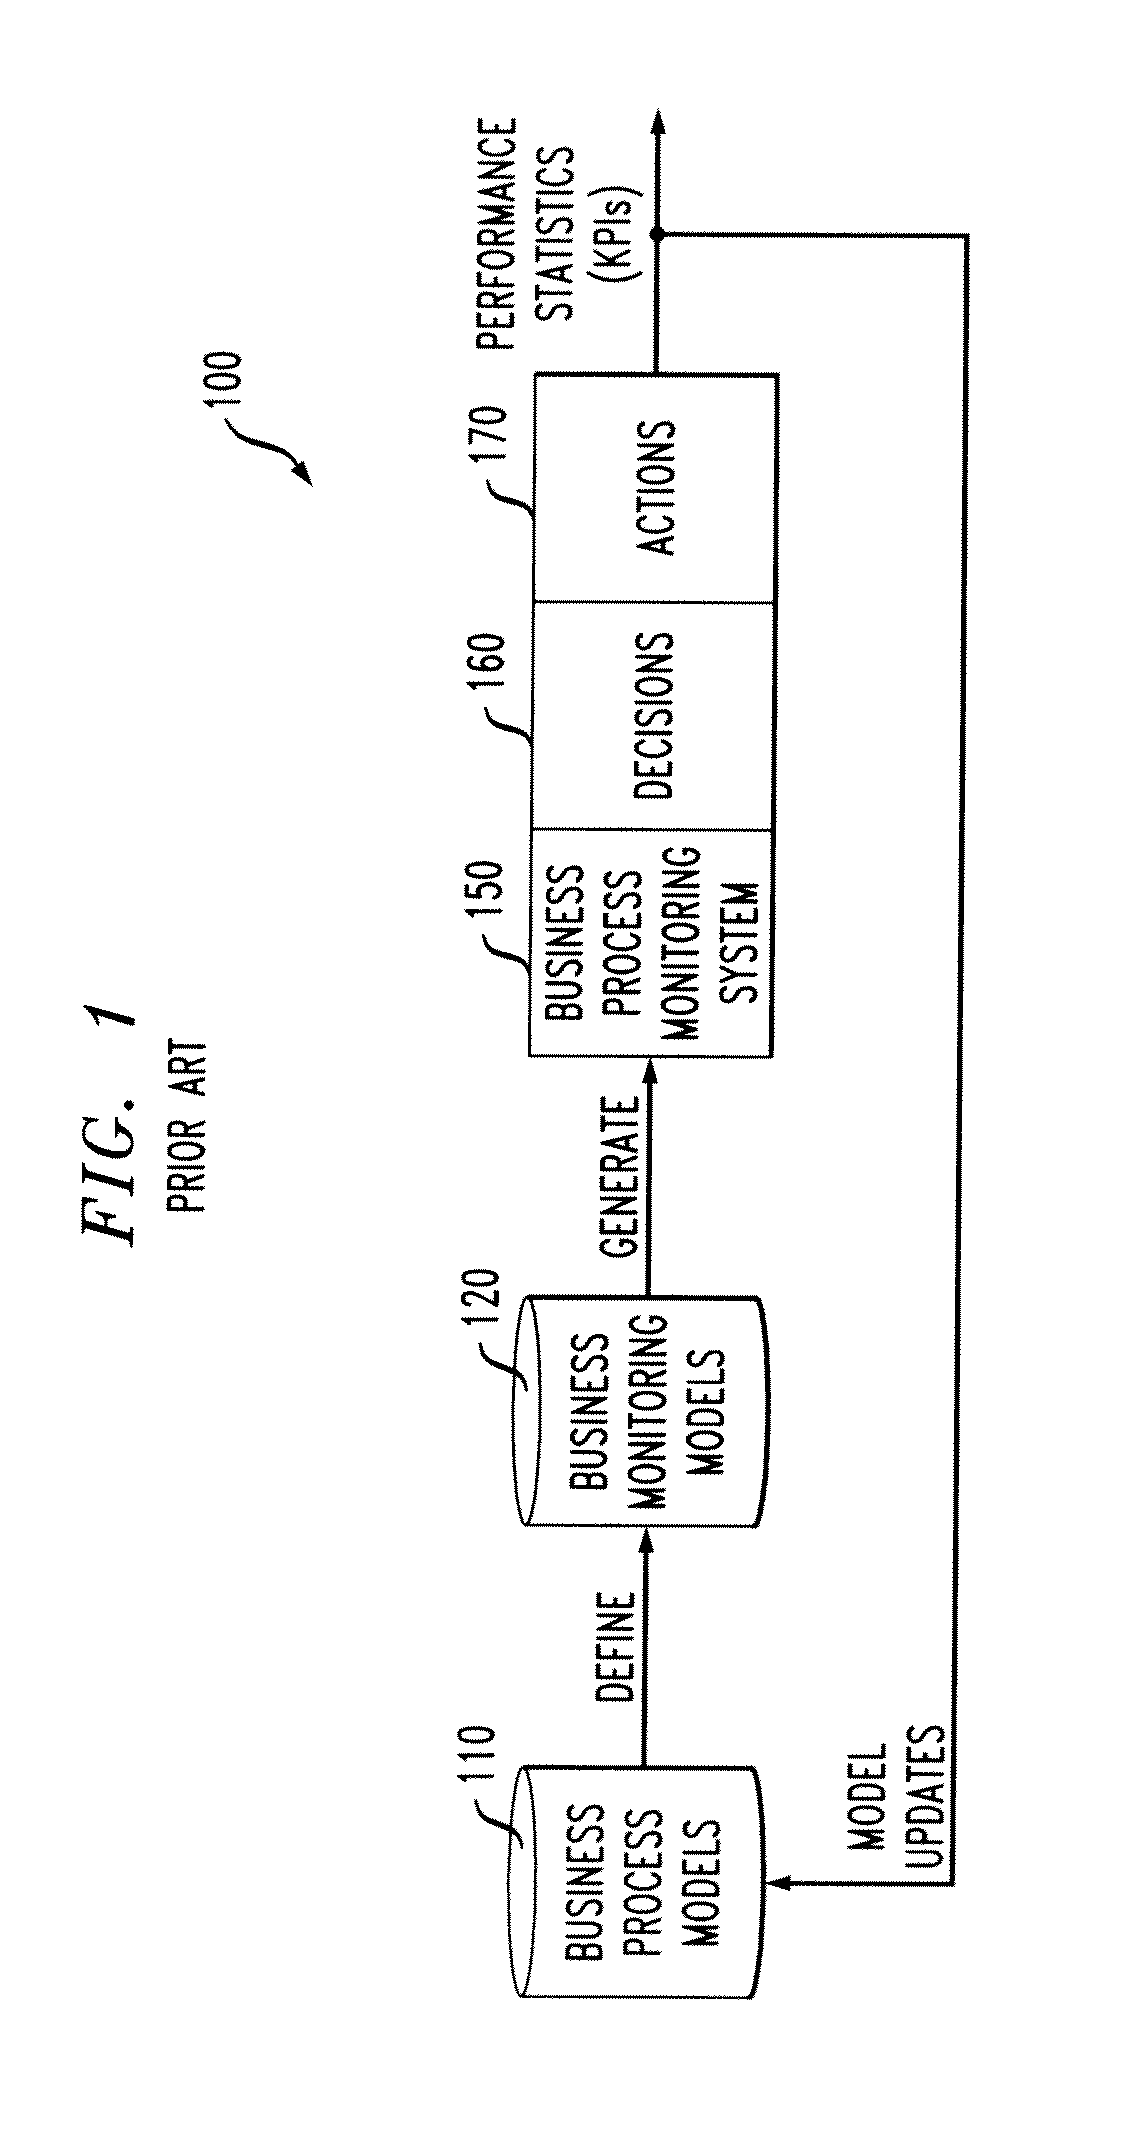 Method and Apparatus for Creating a Monitoring Template for a Business Process